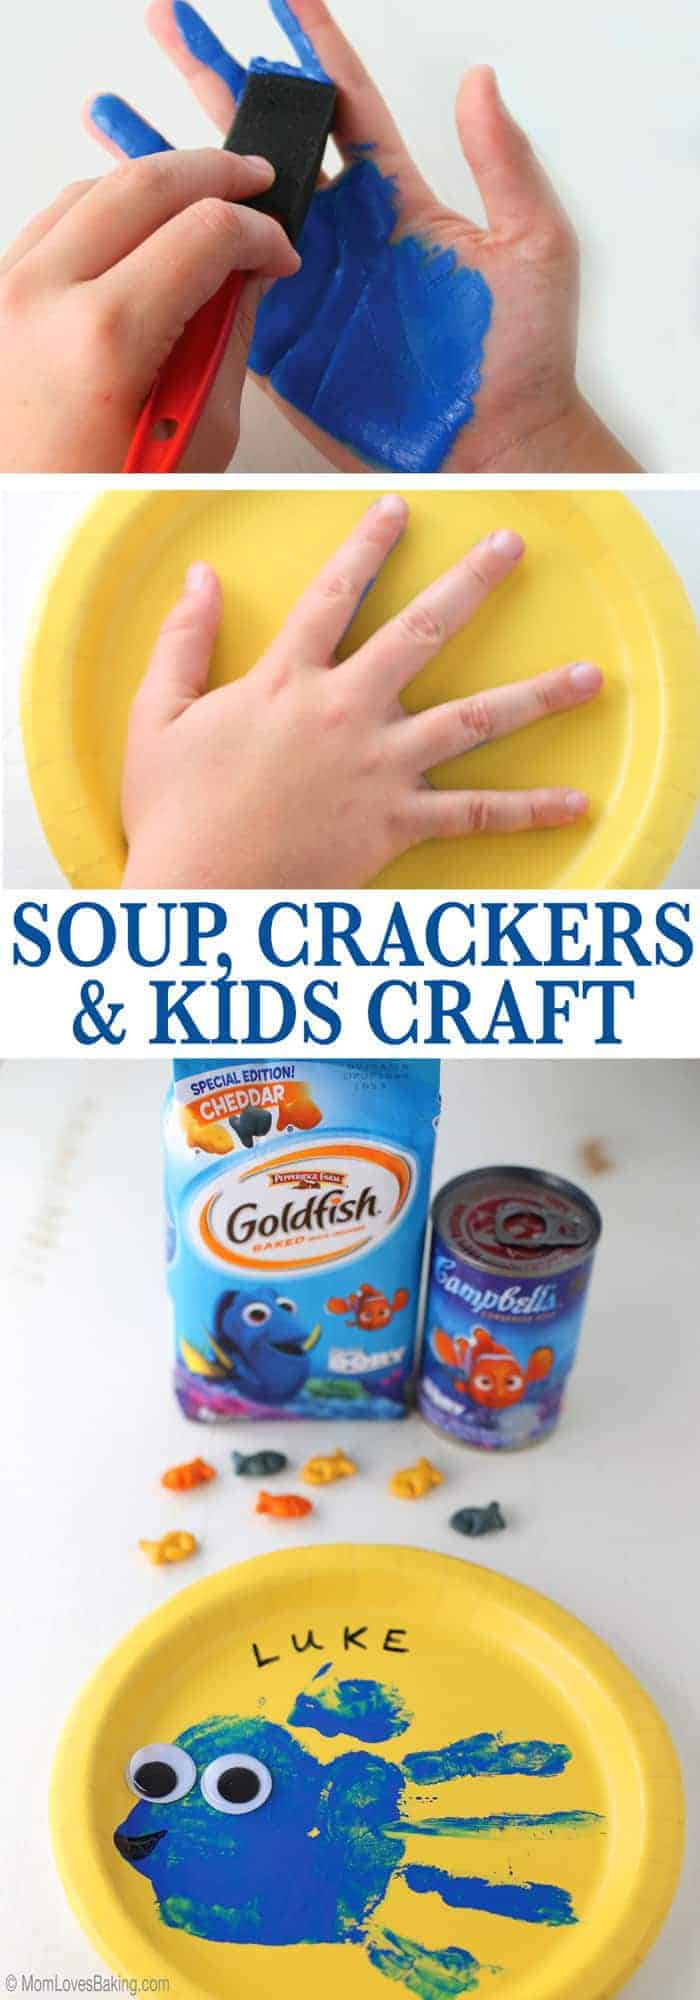 Soup, Crackers & Kids Craft